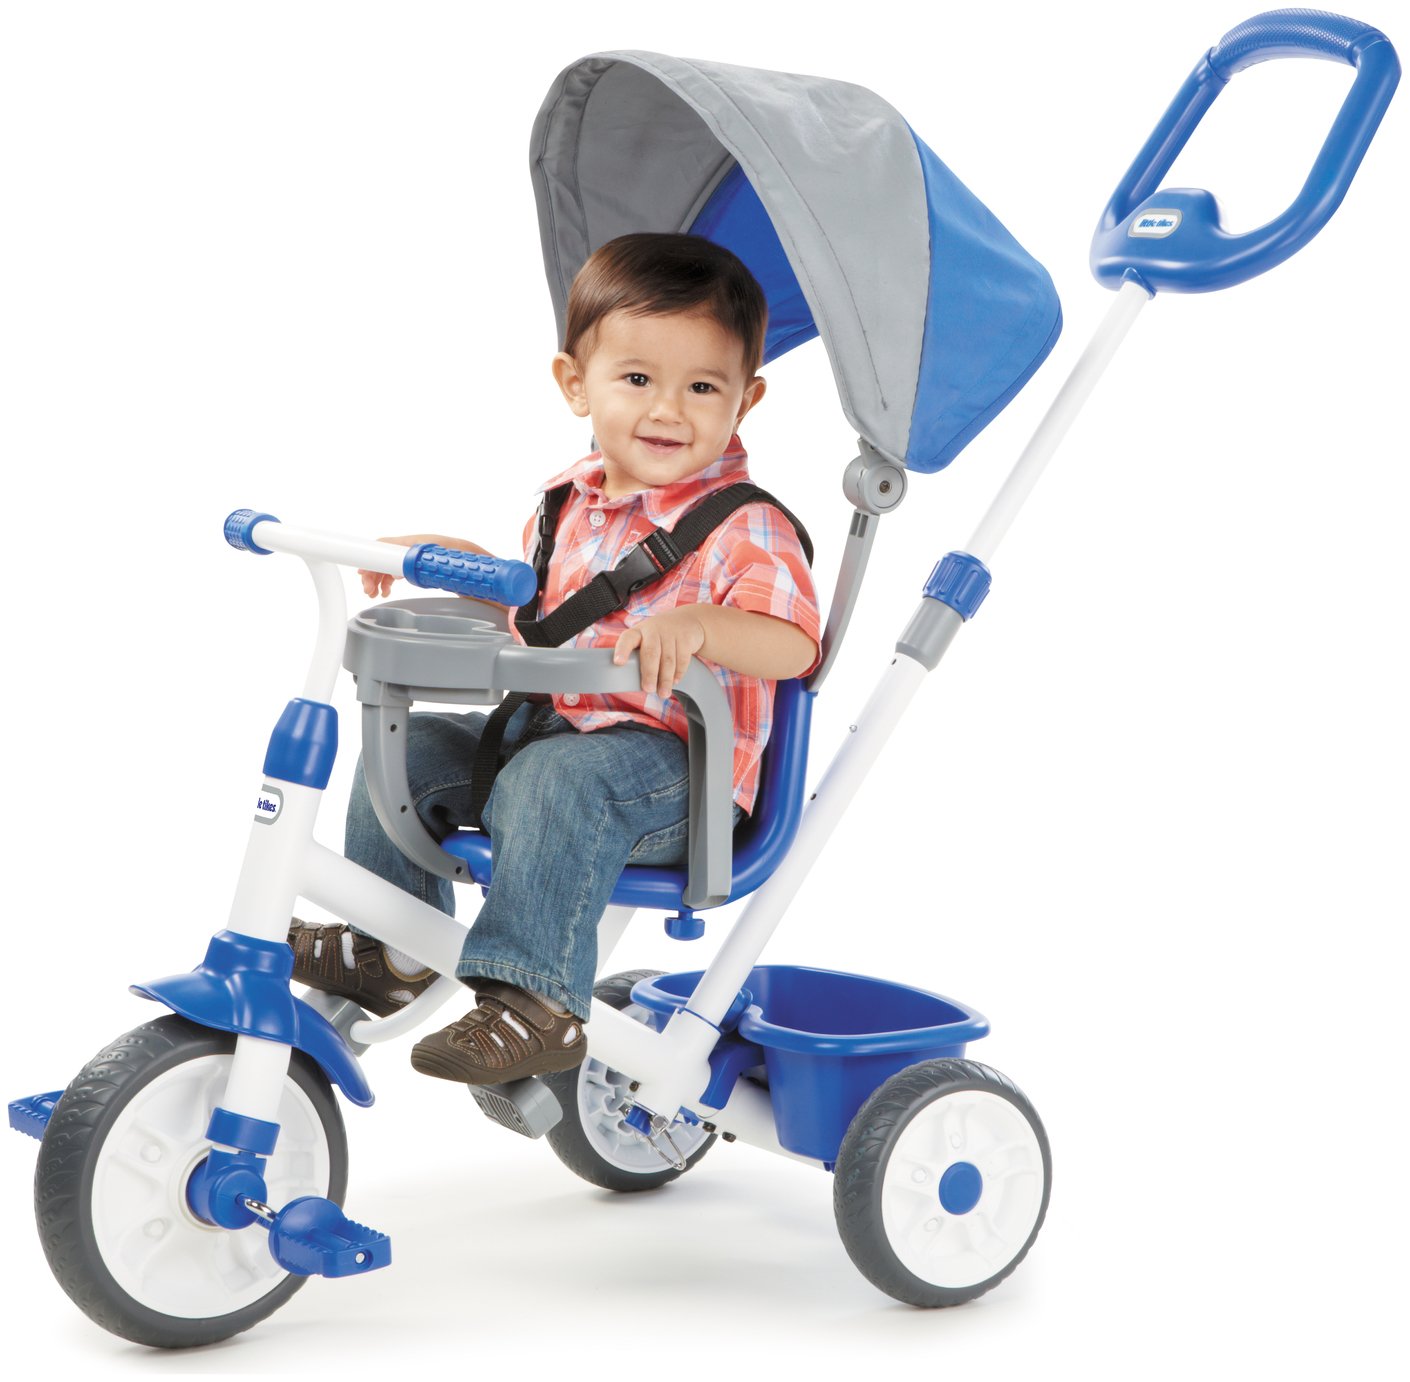 4 in 1 bike for toddlers